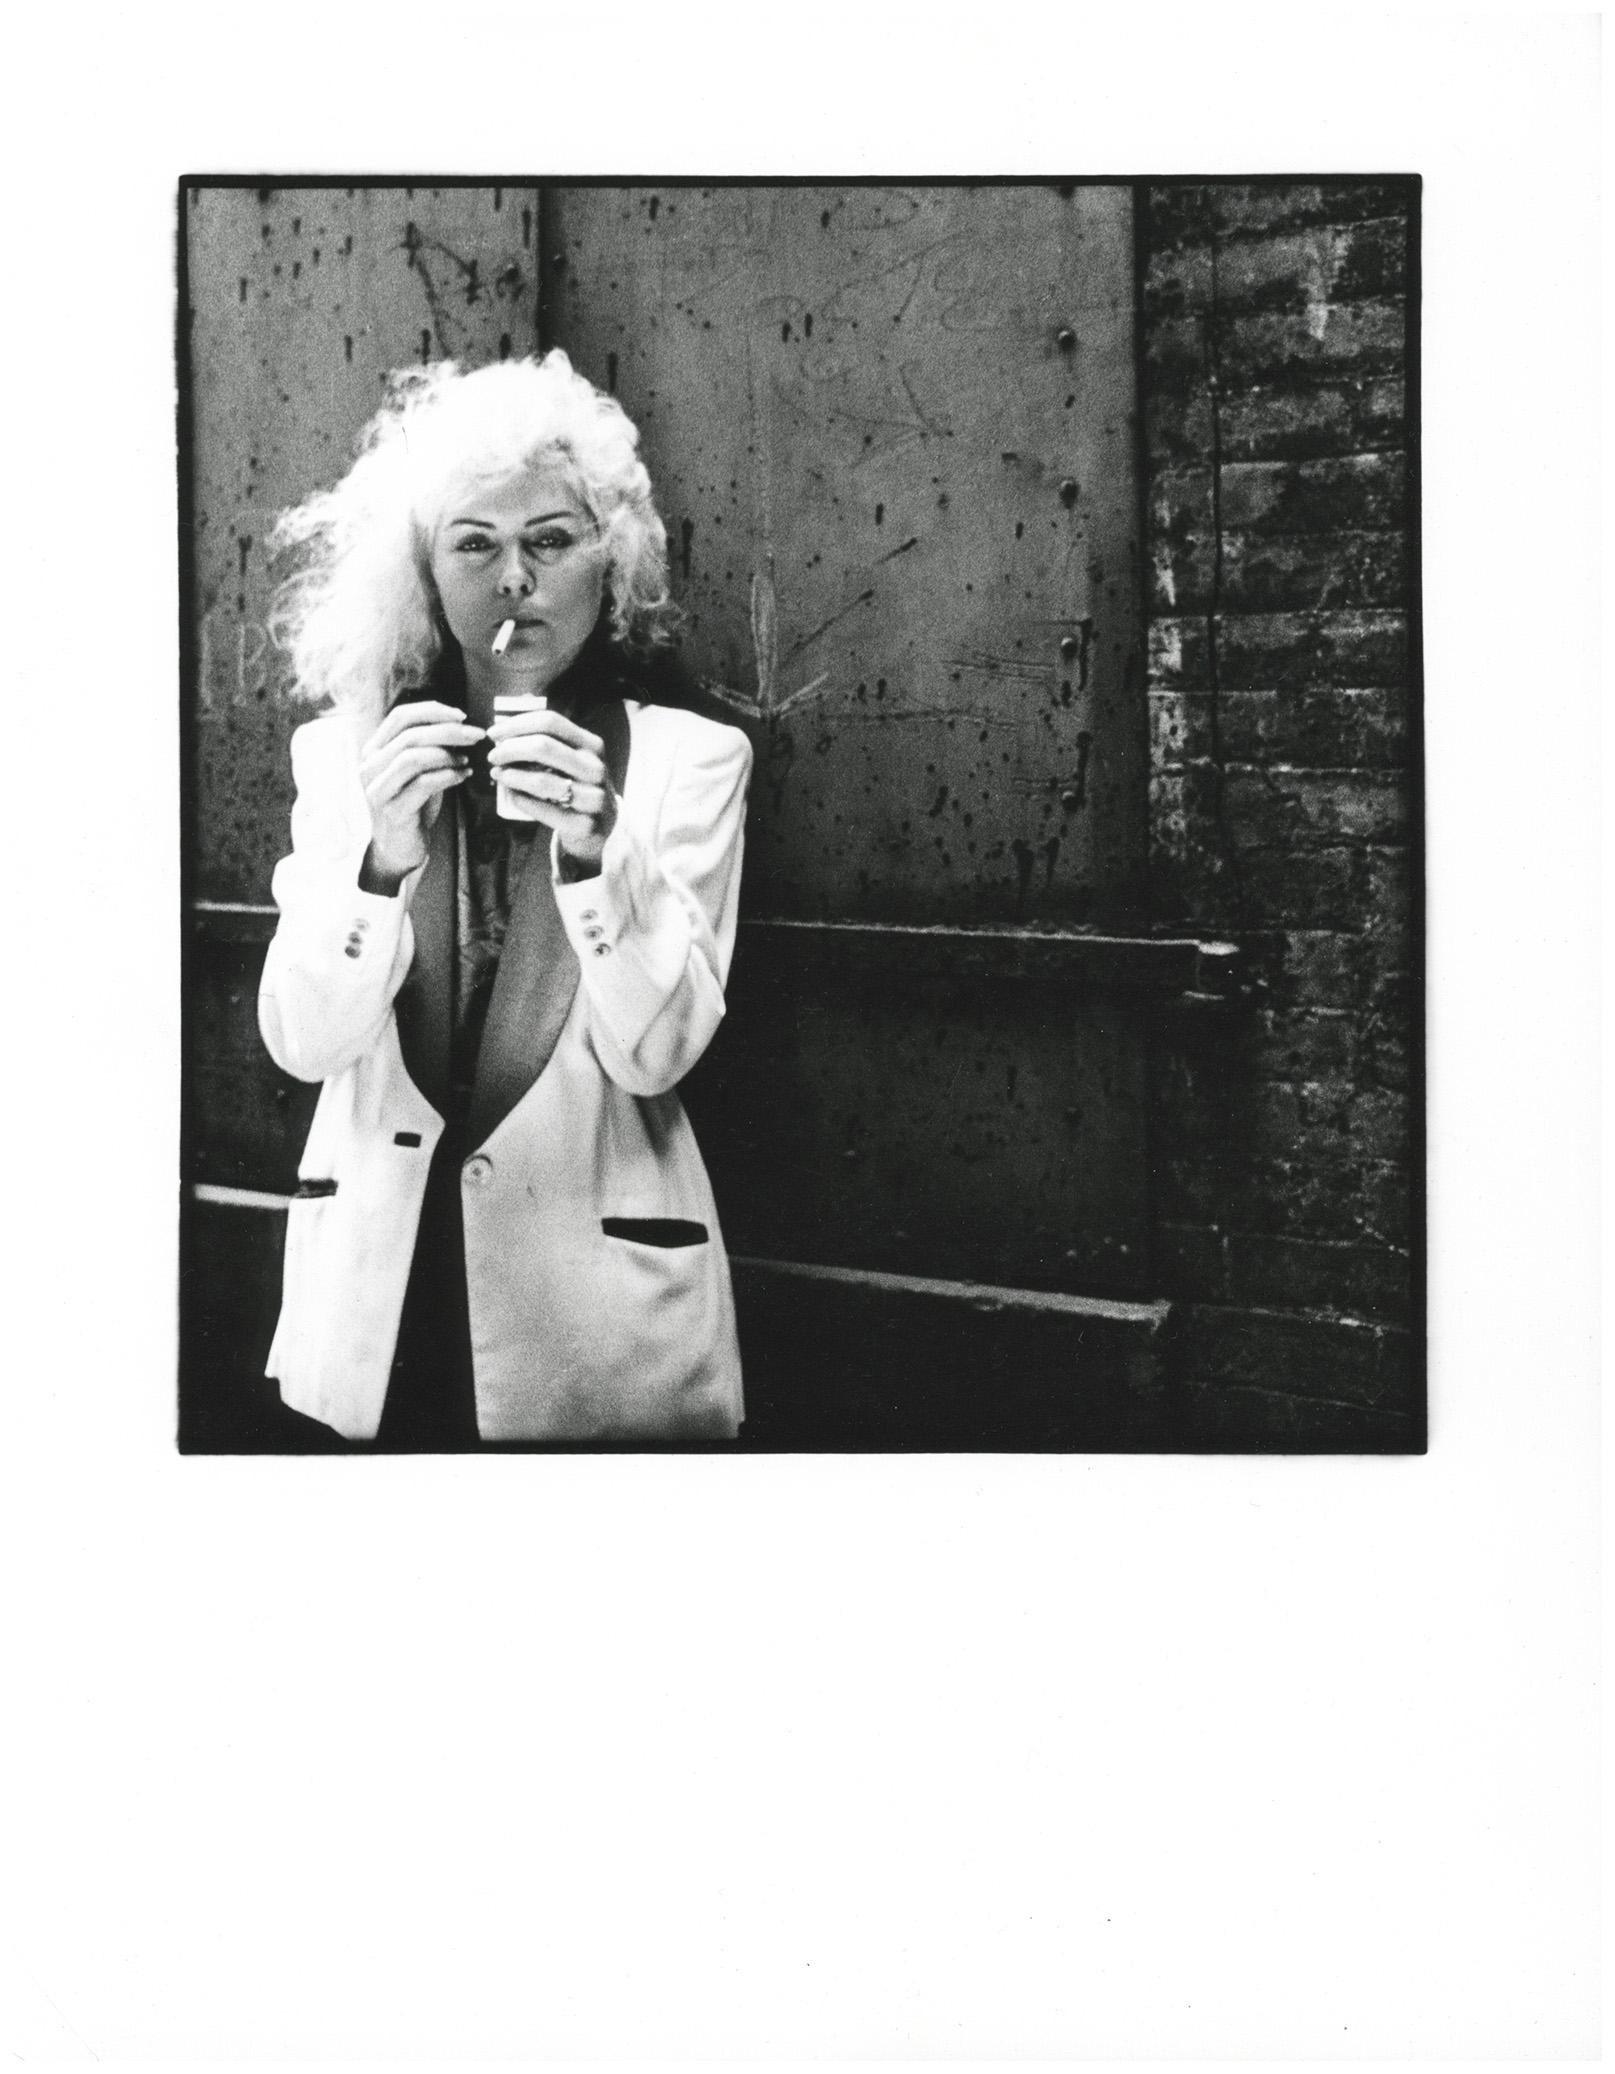 Debbie Harry on the set of The Foreigner East Village 1977 (Blondie photograph)  - Photograph by Fernando Natalici